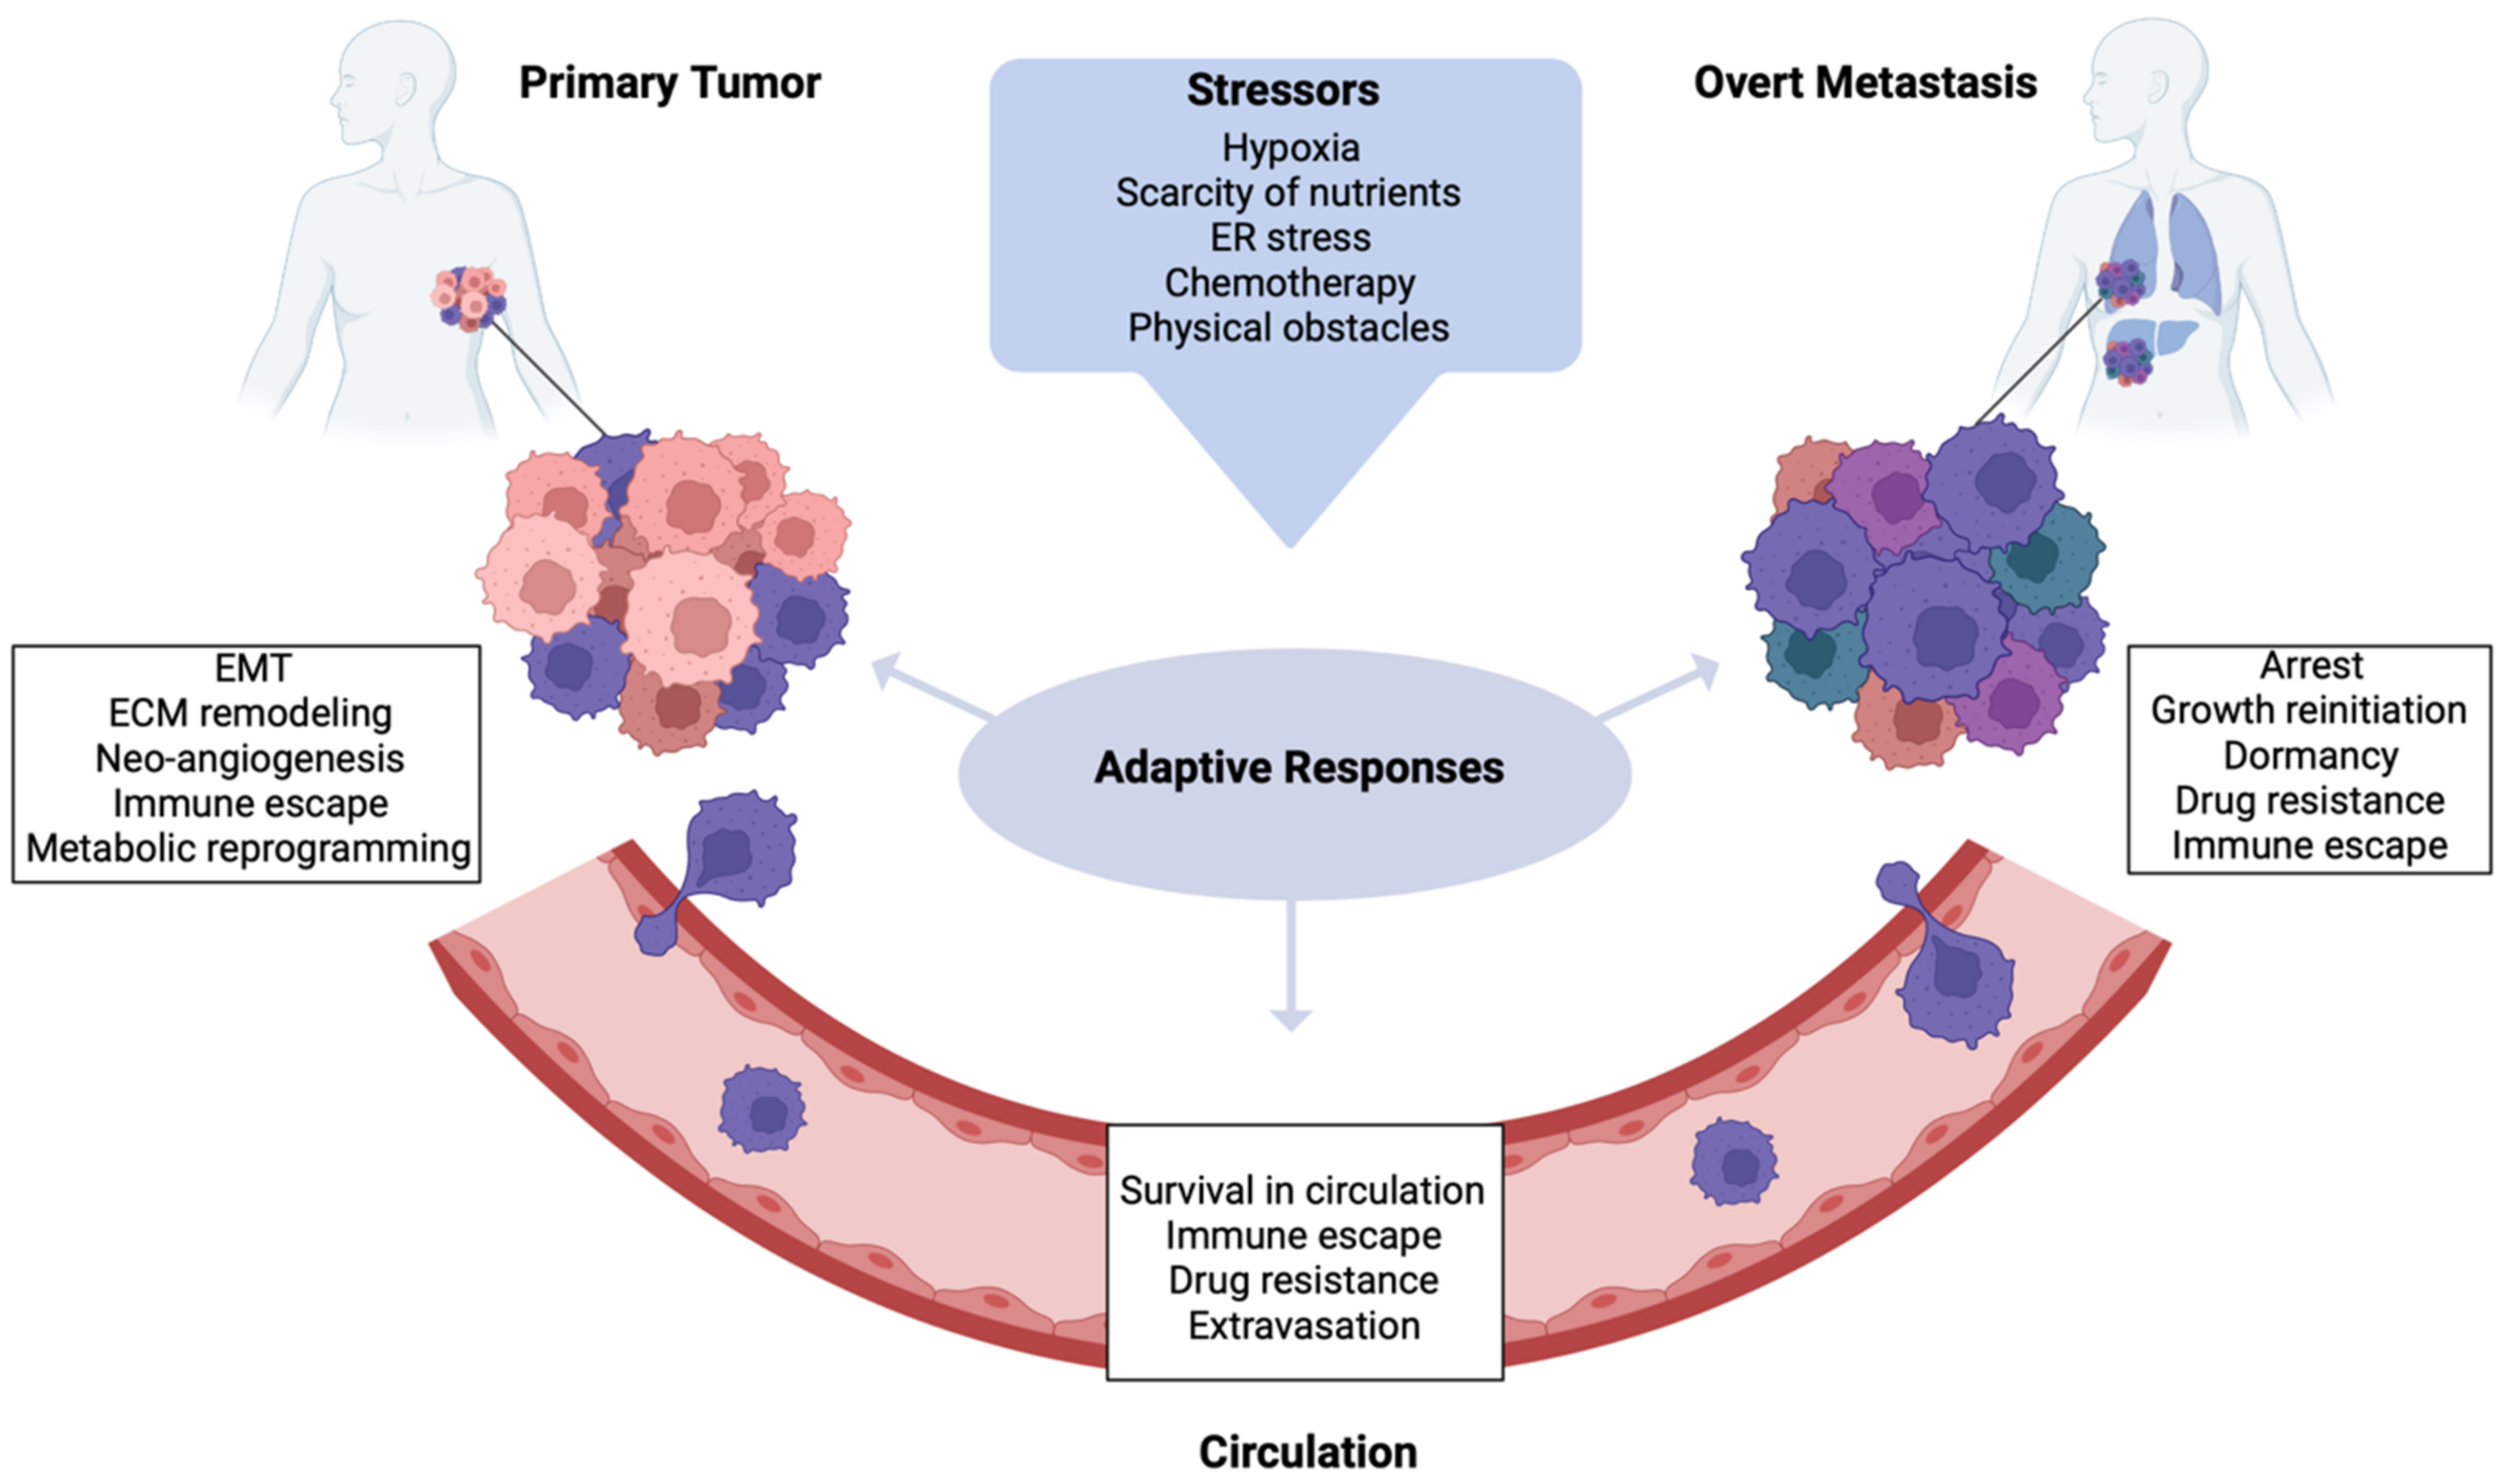 Genomic Evolution of Breast Cancer Metastasis and Relapse